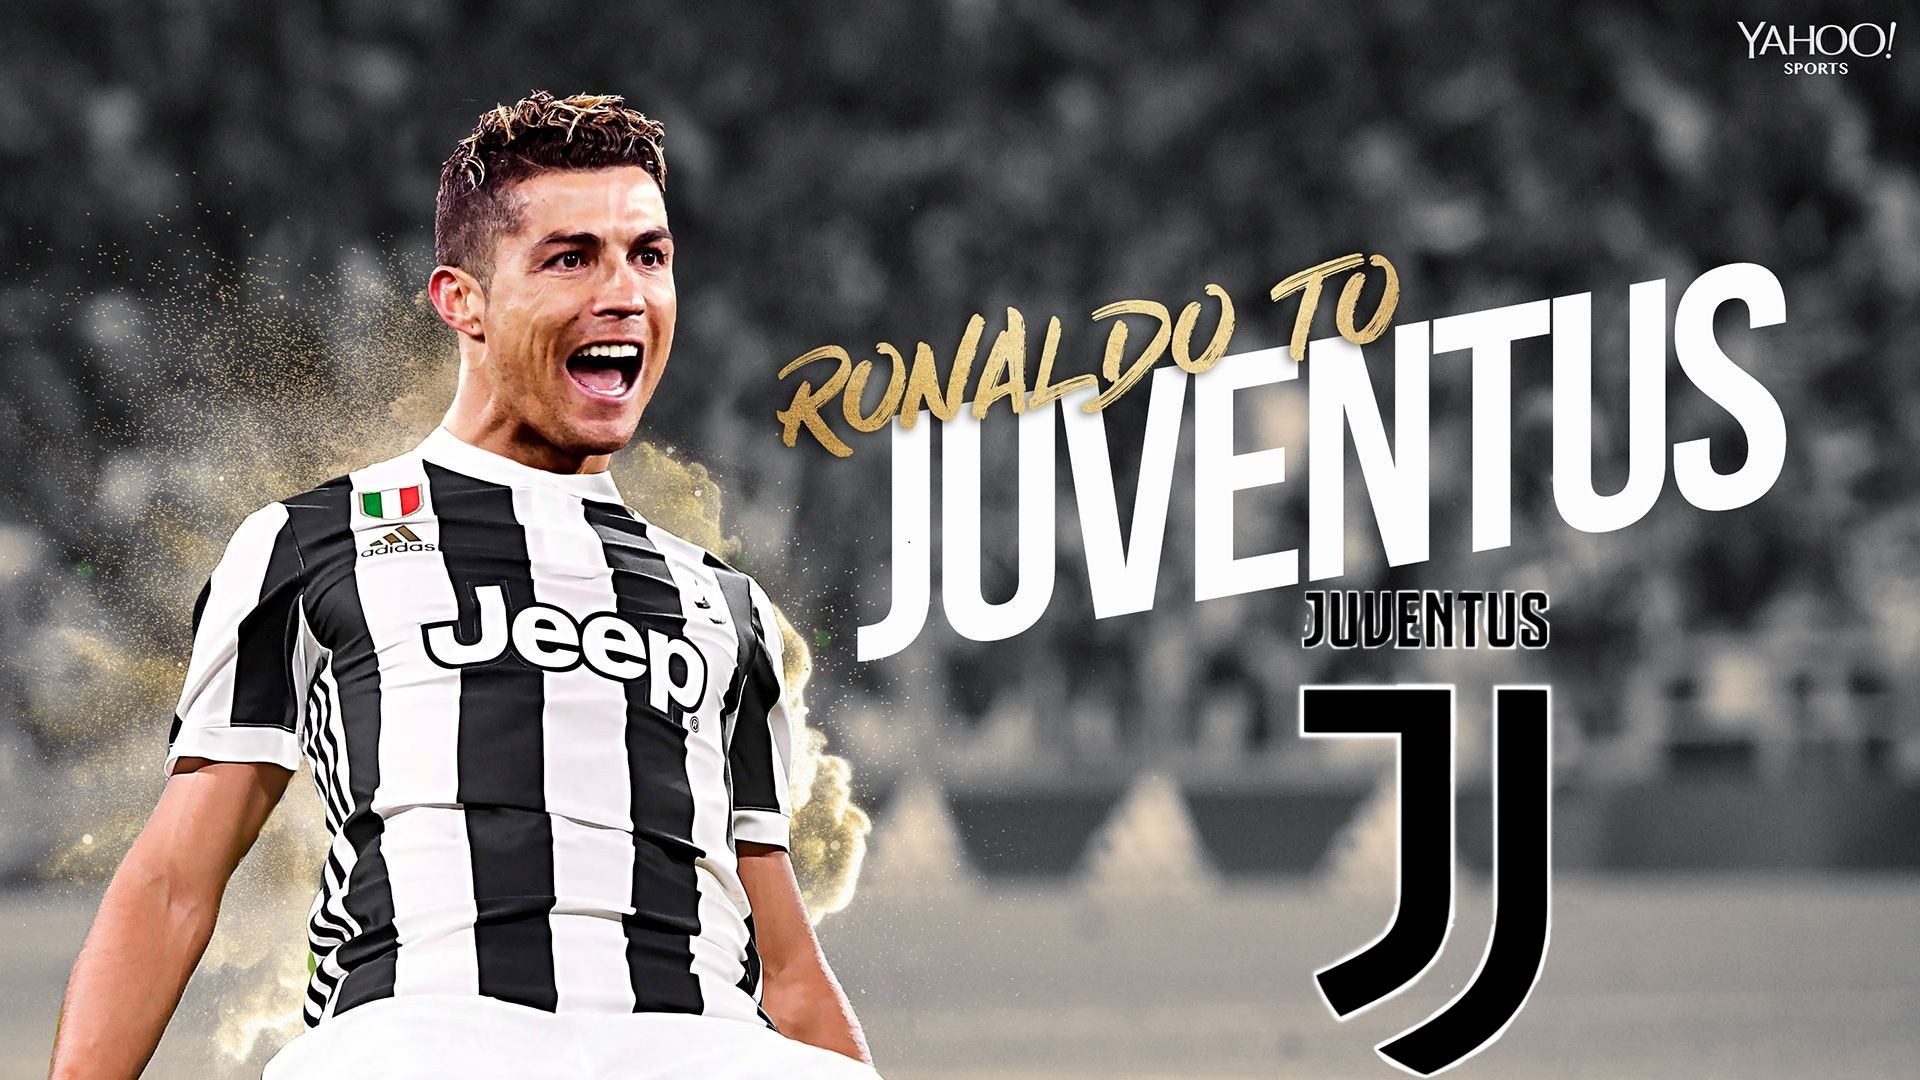 C Ronaldo Juventus Desktop Wallpapers with resolution 1920x1080 pixel. You can make this wallpaper for your Mac or Windows Desktop Background, iPhone, Android or Tablet and another Smartphone device